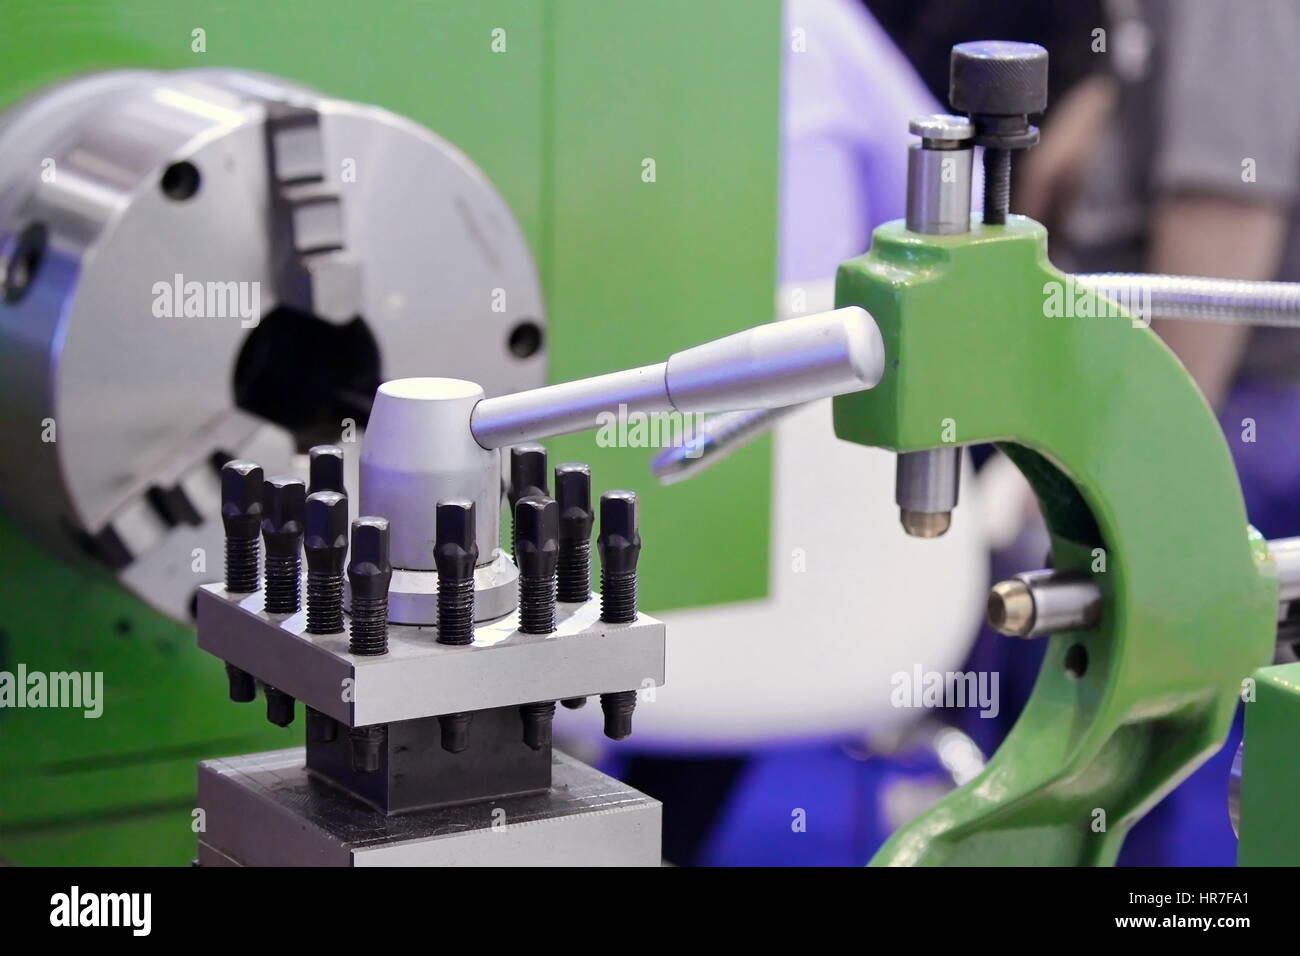 Lathe Machine for Industrial Working Stock Photo